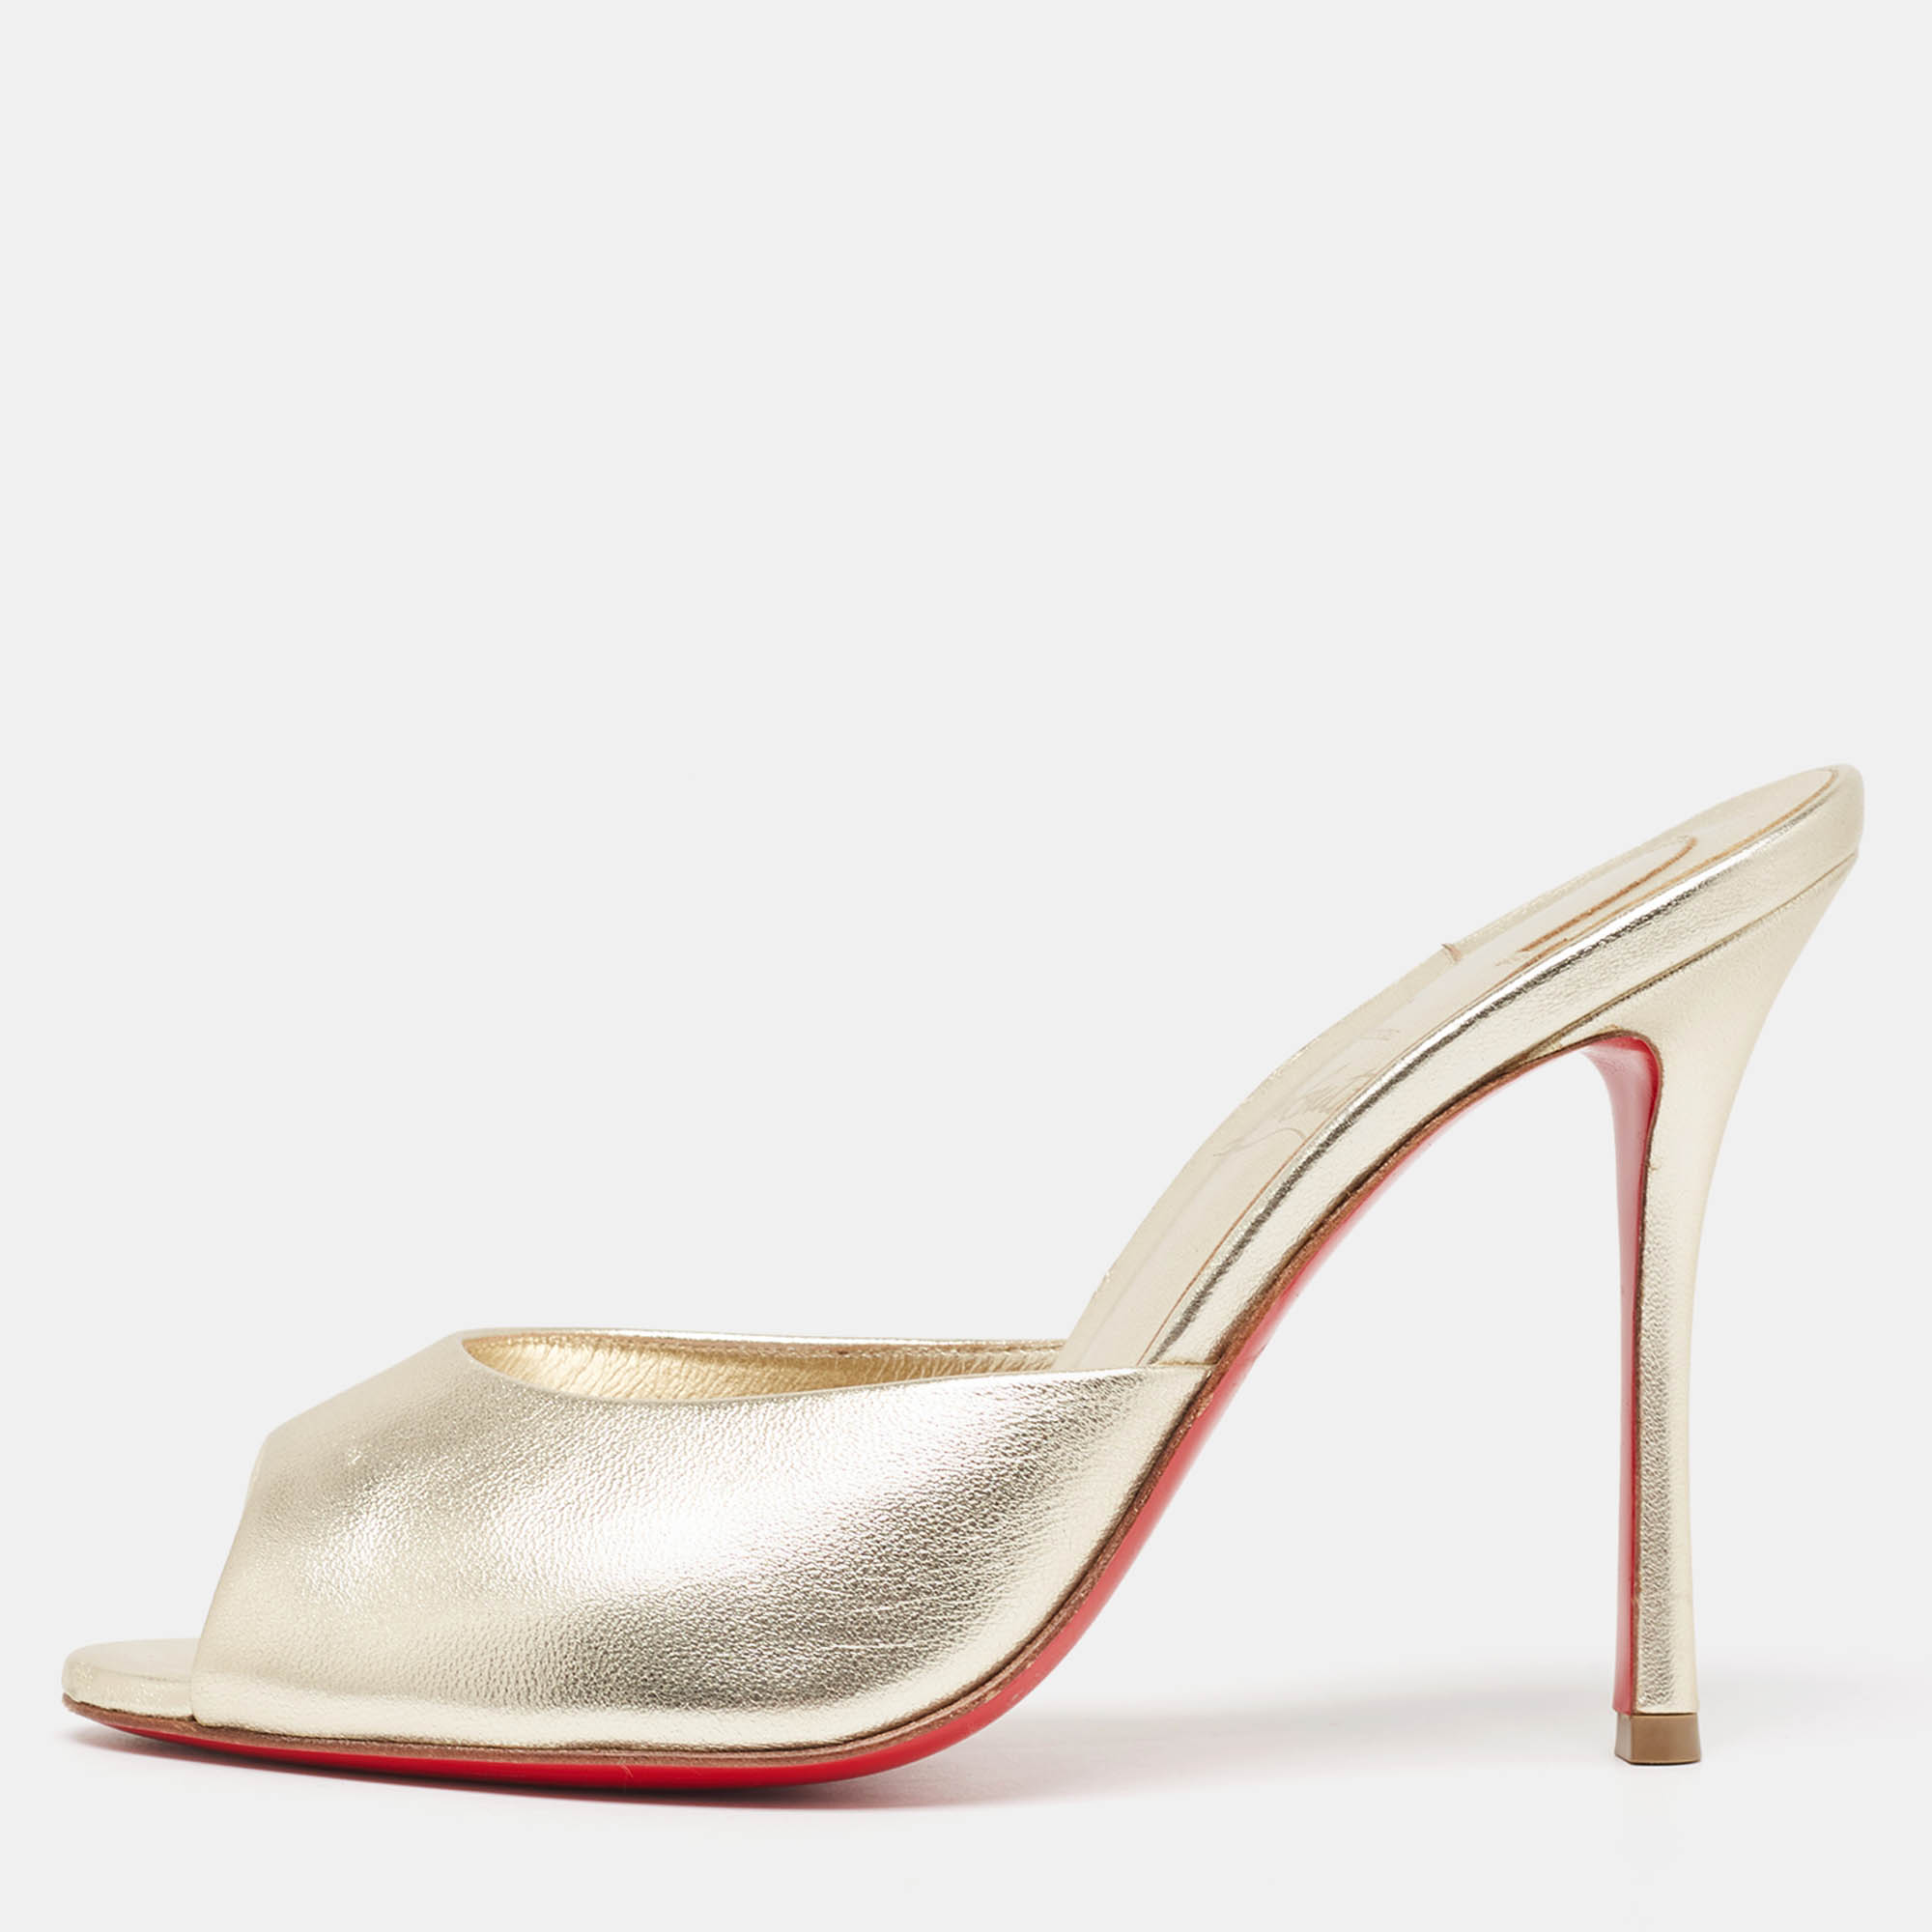 Christian louboutin silver leather me dolly open toe slide sandals size 36